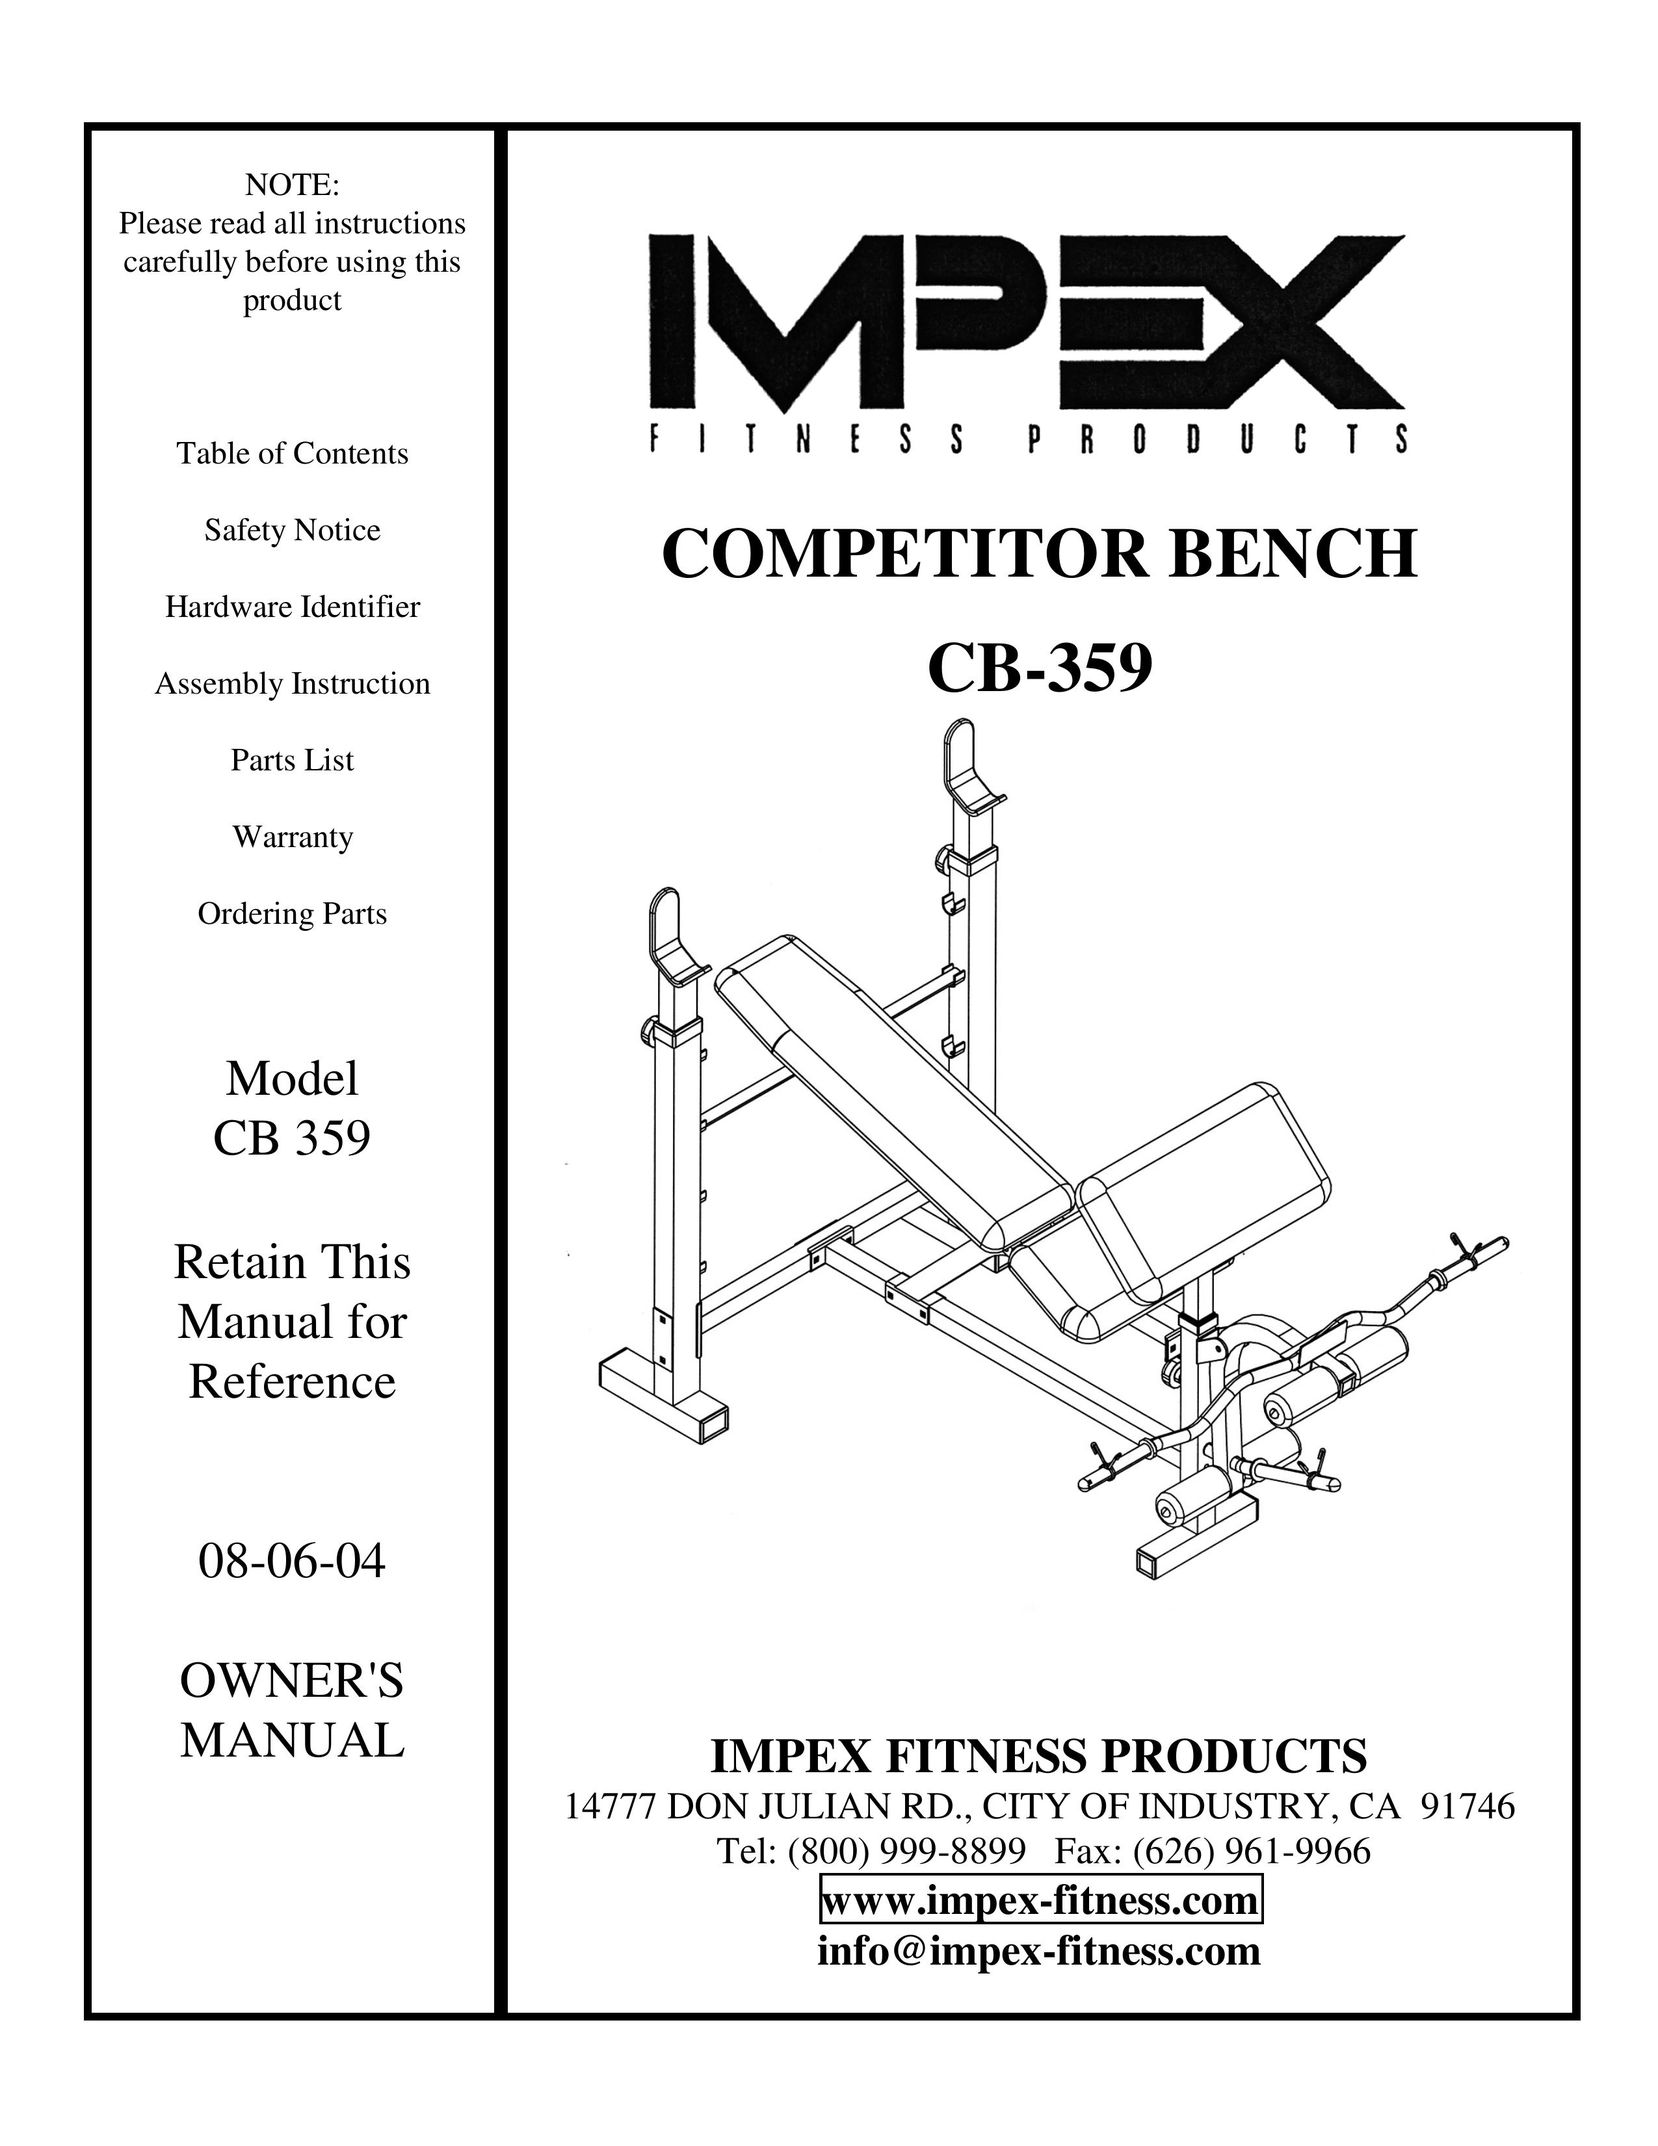 Impex CB-359 Home Gym User Manual